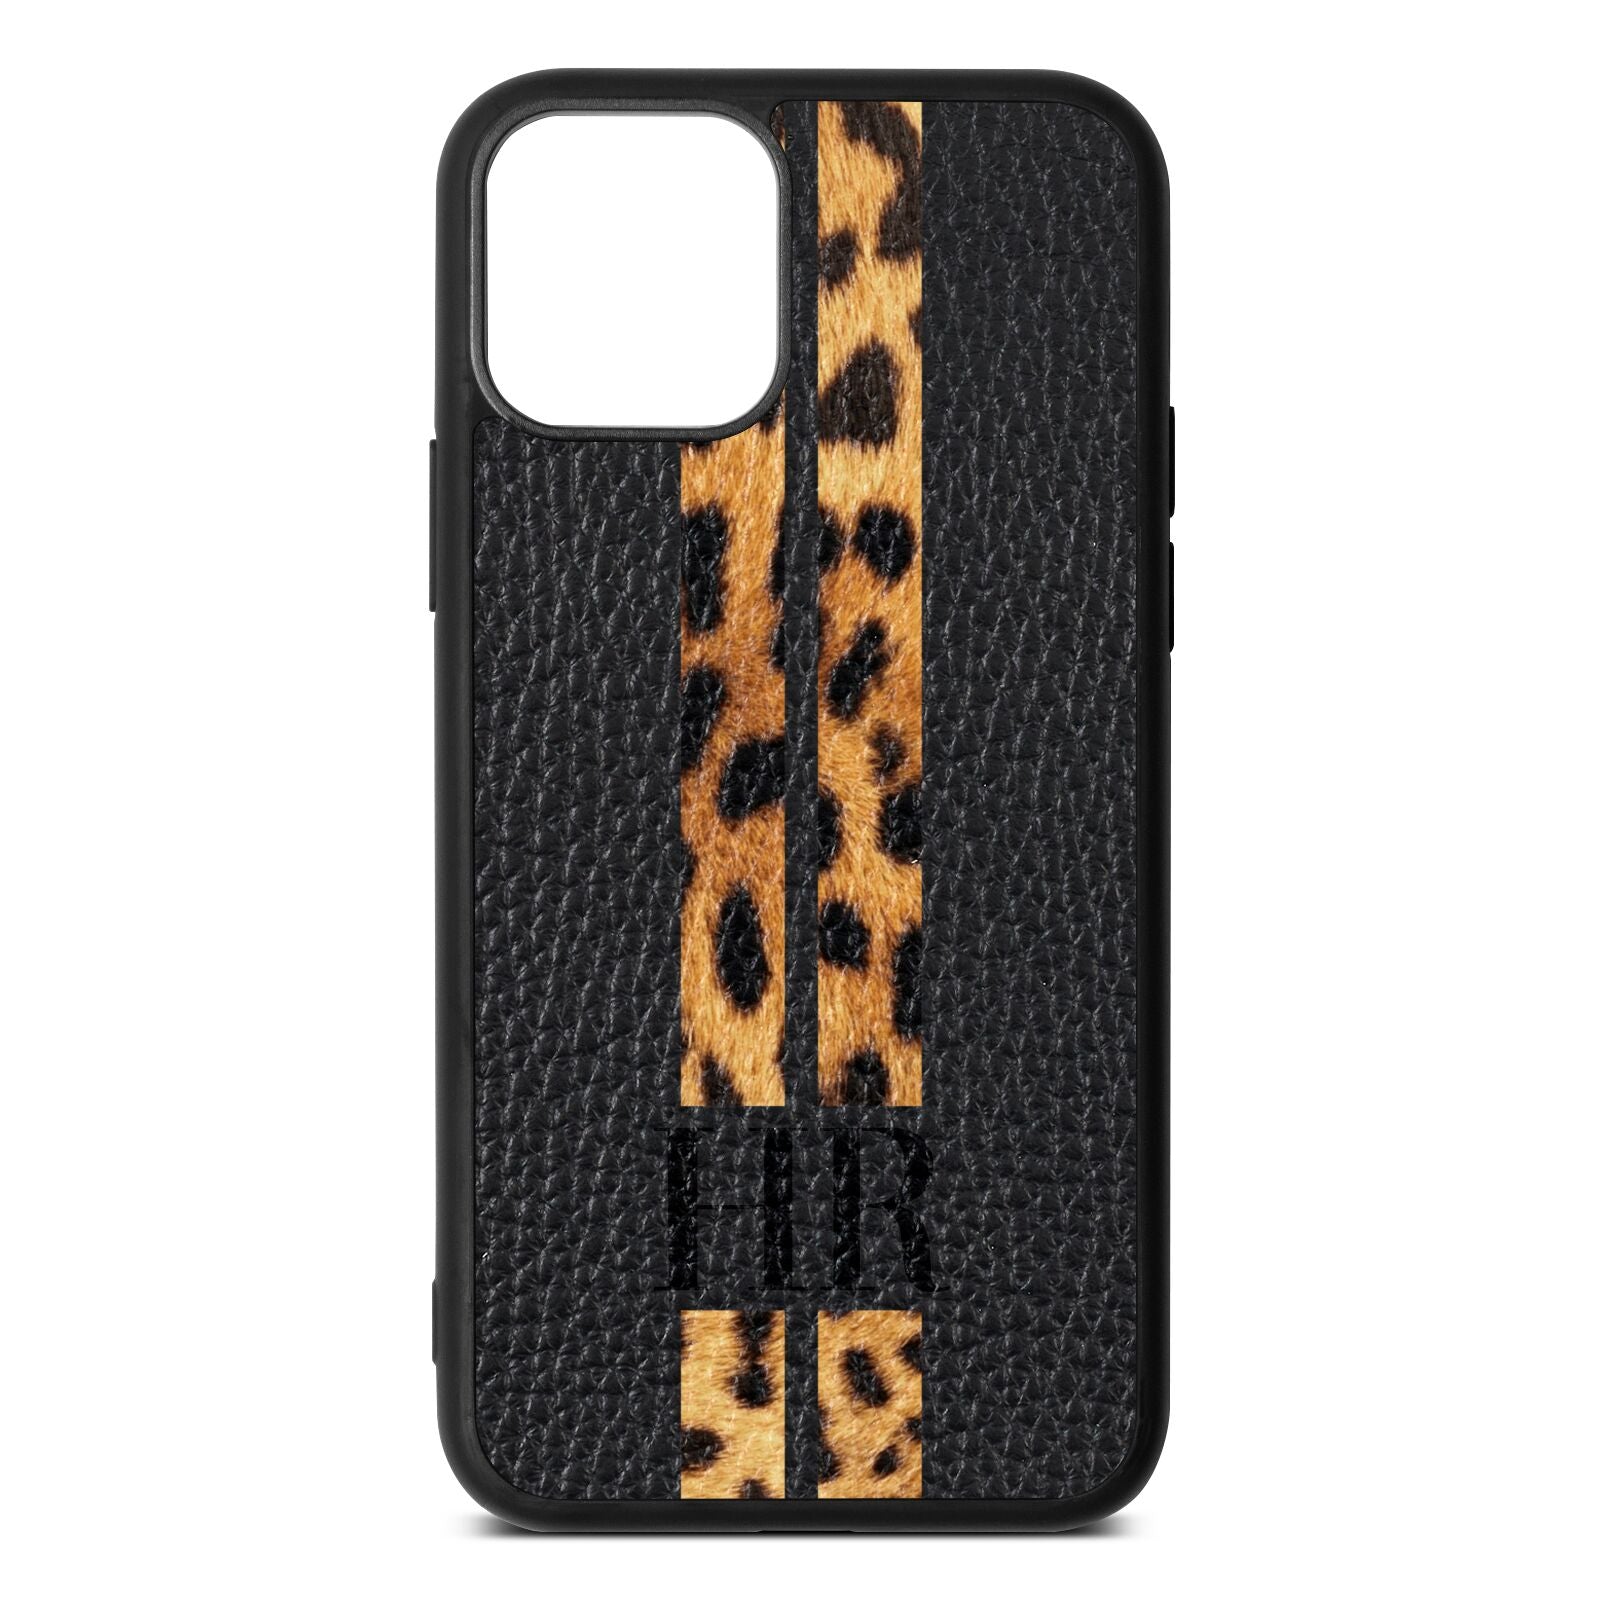 Initialled Leopard Print Stripes Black Pebble Leather iPhone 11 Pro Case